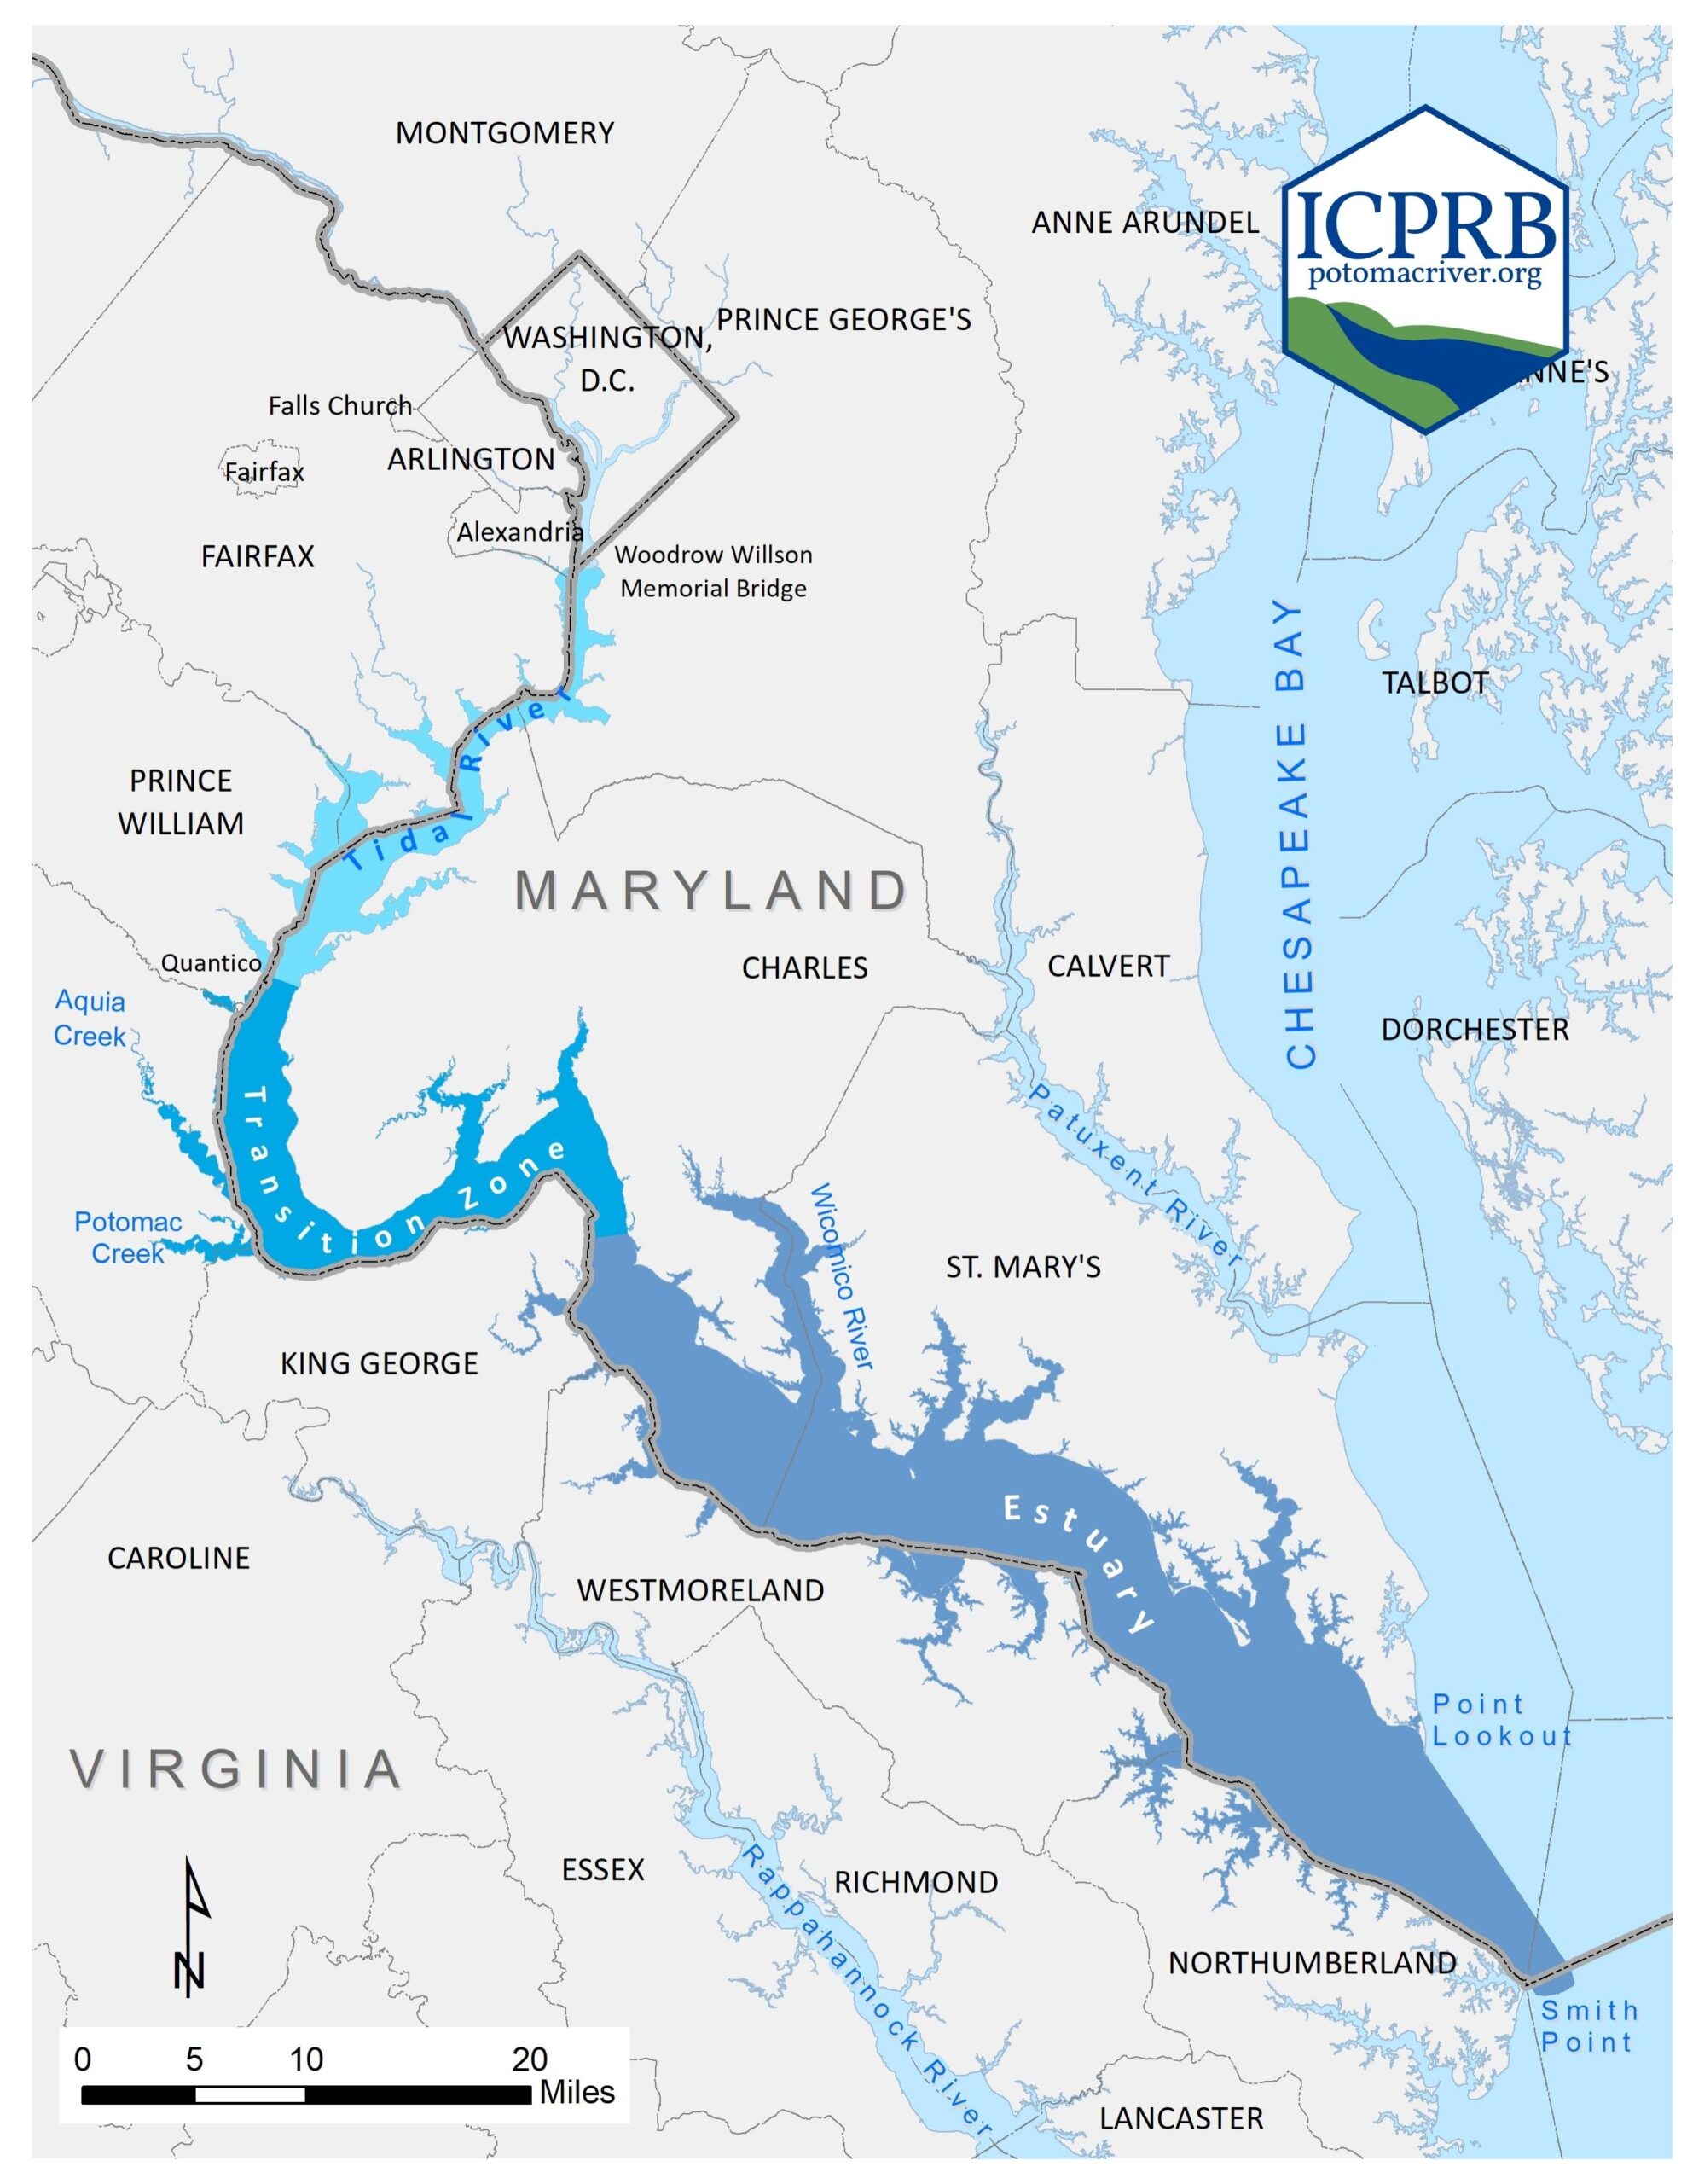 Map of the tidal zone, transition zone, and estuary of the Potomac River.